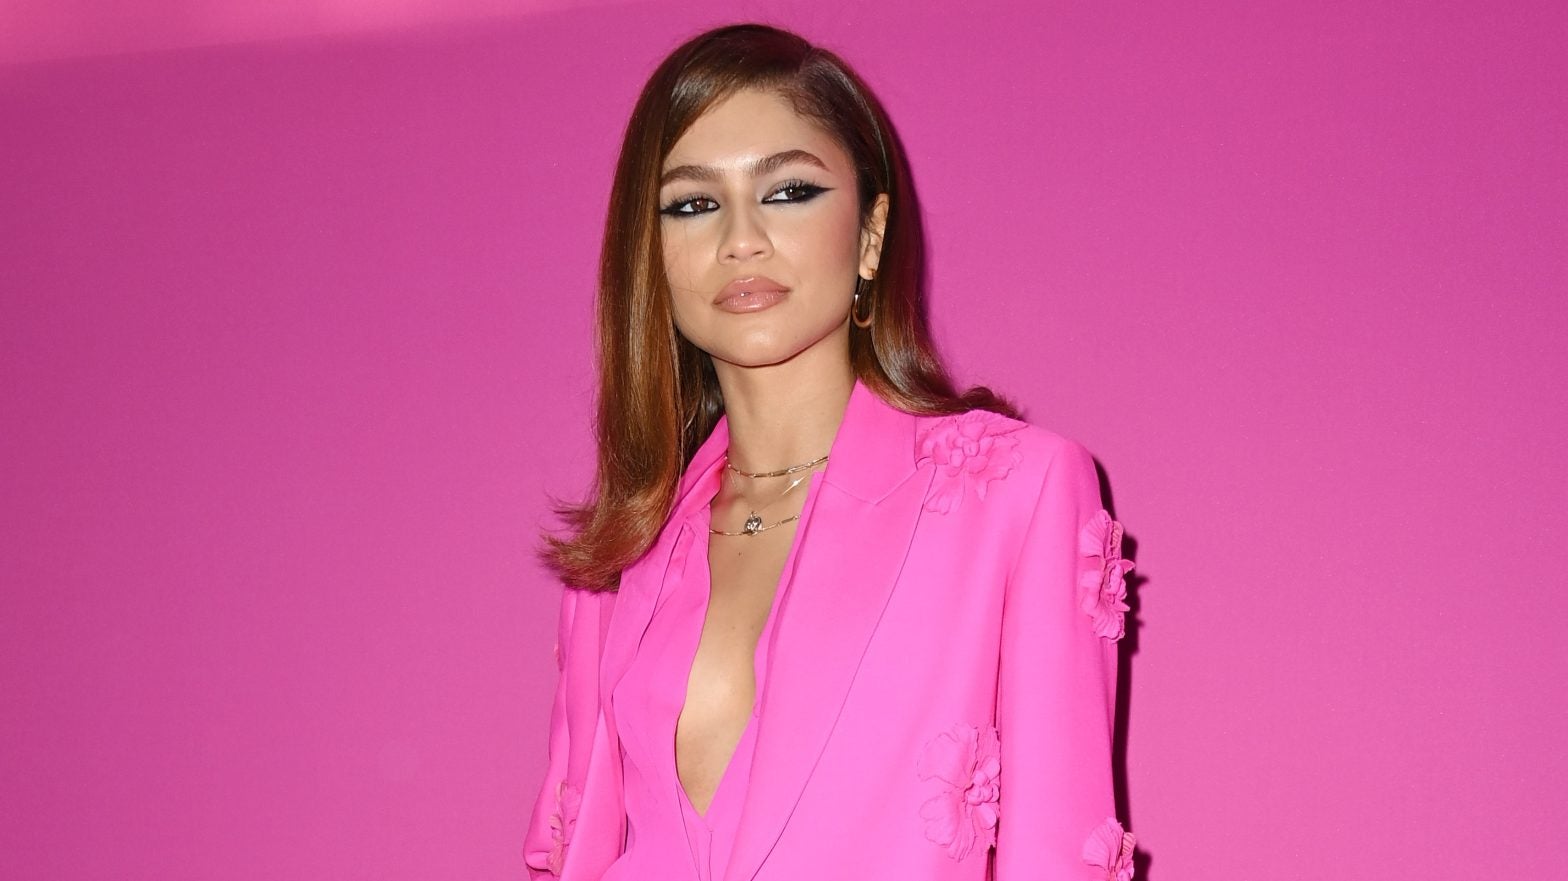 Maison Valentino Pink Is Clearly The New Black – According to Zendaya